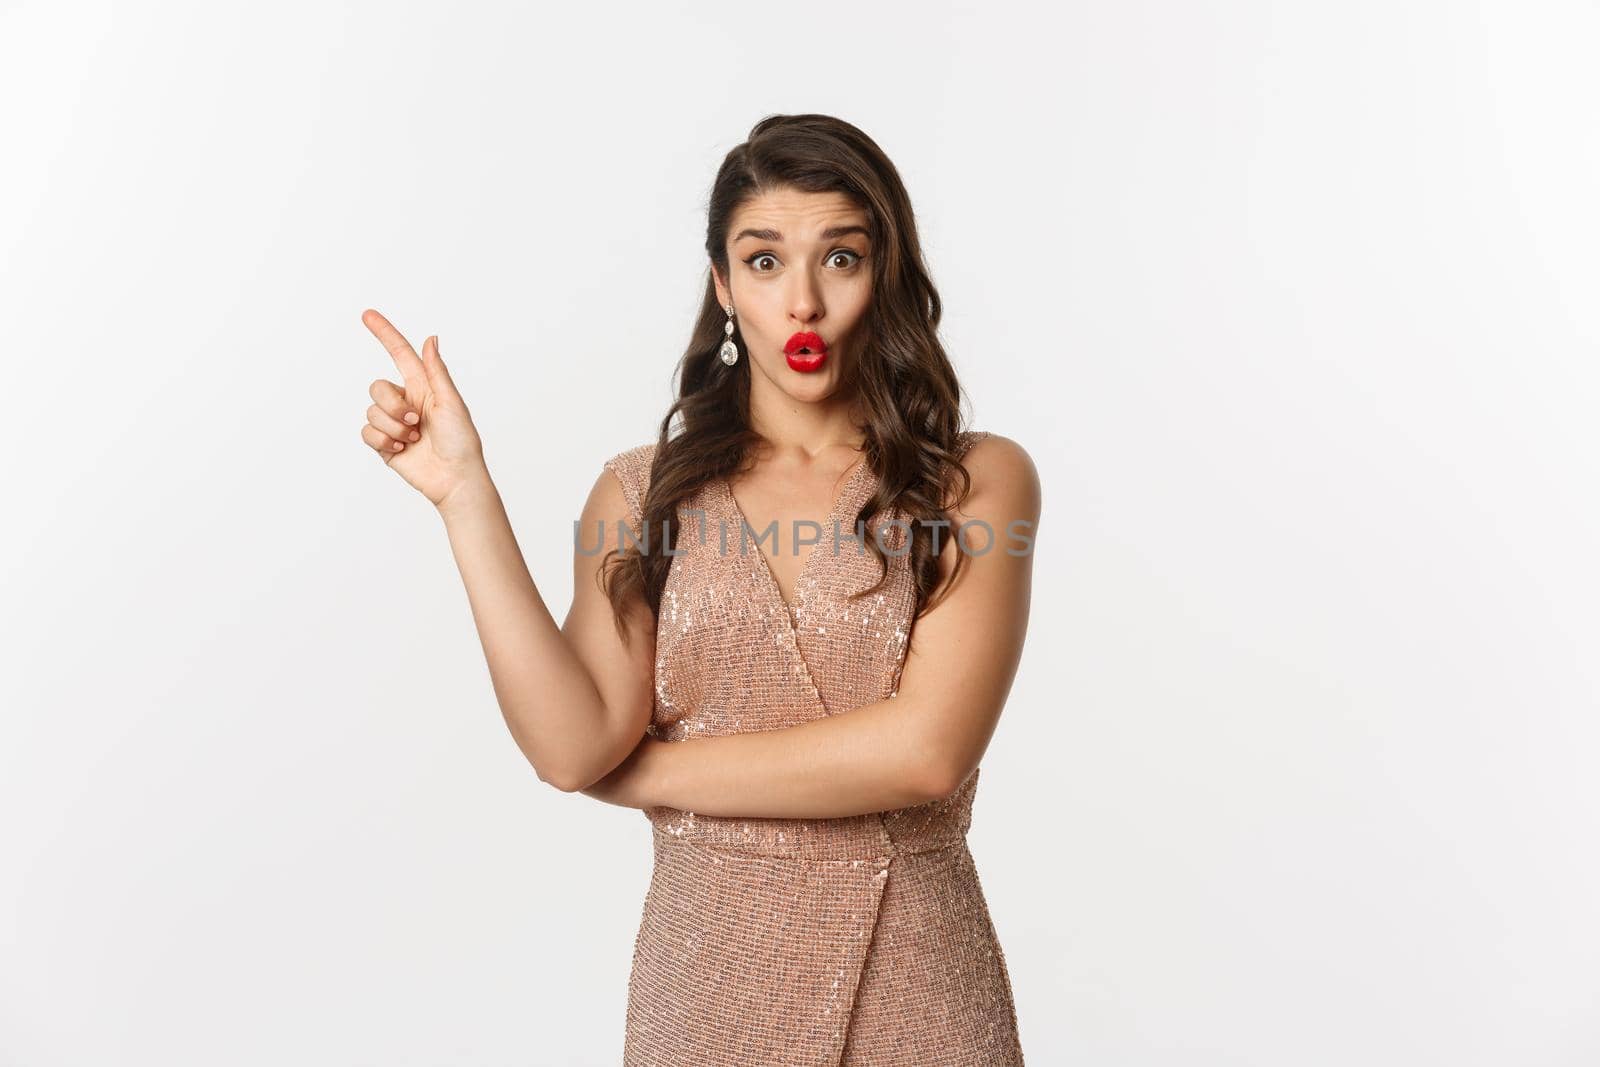 Christmas, holidays and celebration concept. Intrigued beautiful woman asking question about promo offer, pointing finger left at logo or banner, standing in party dress.